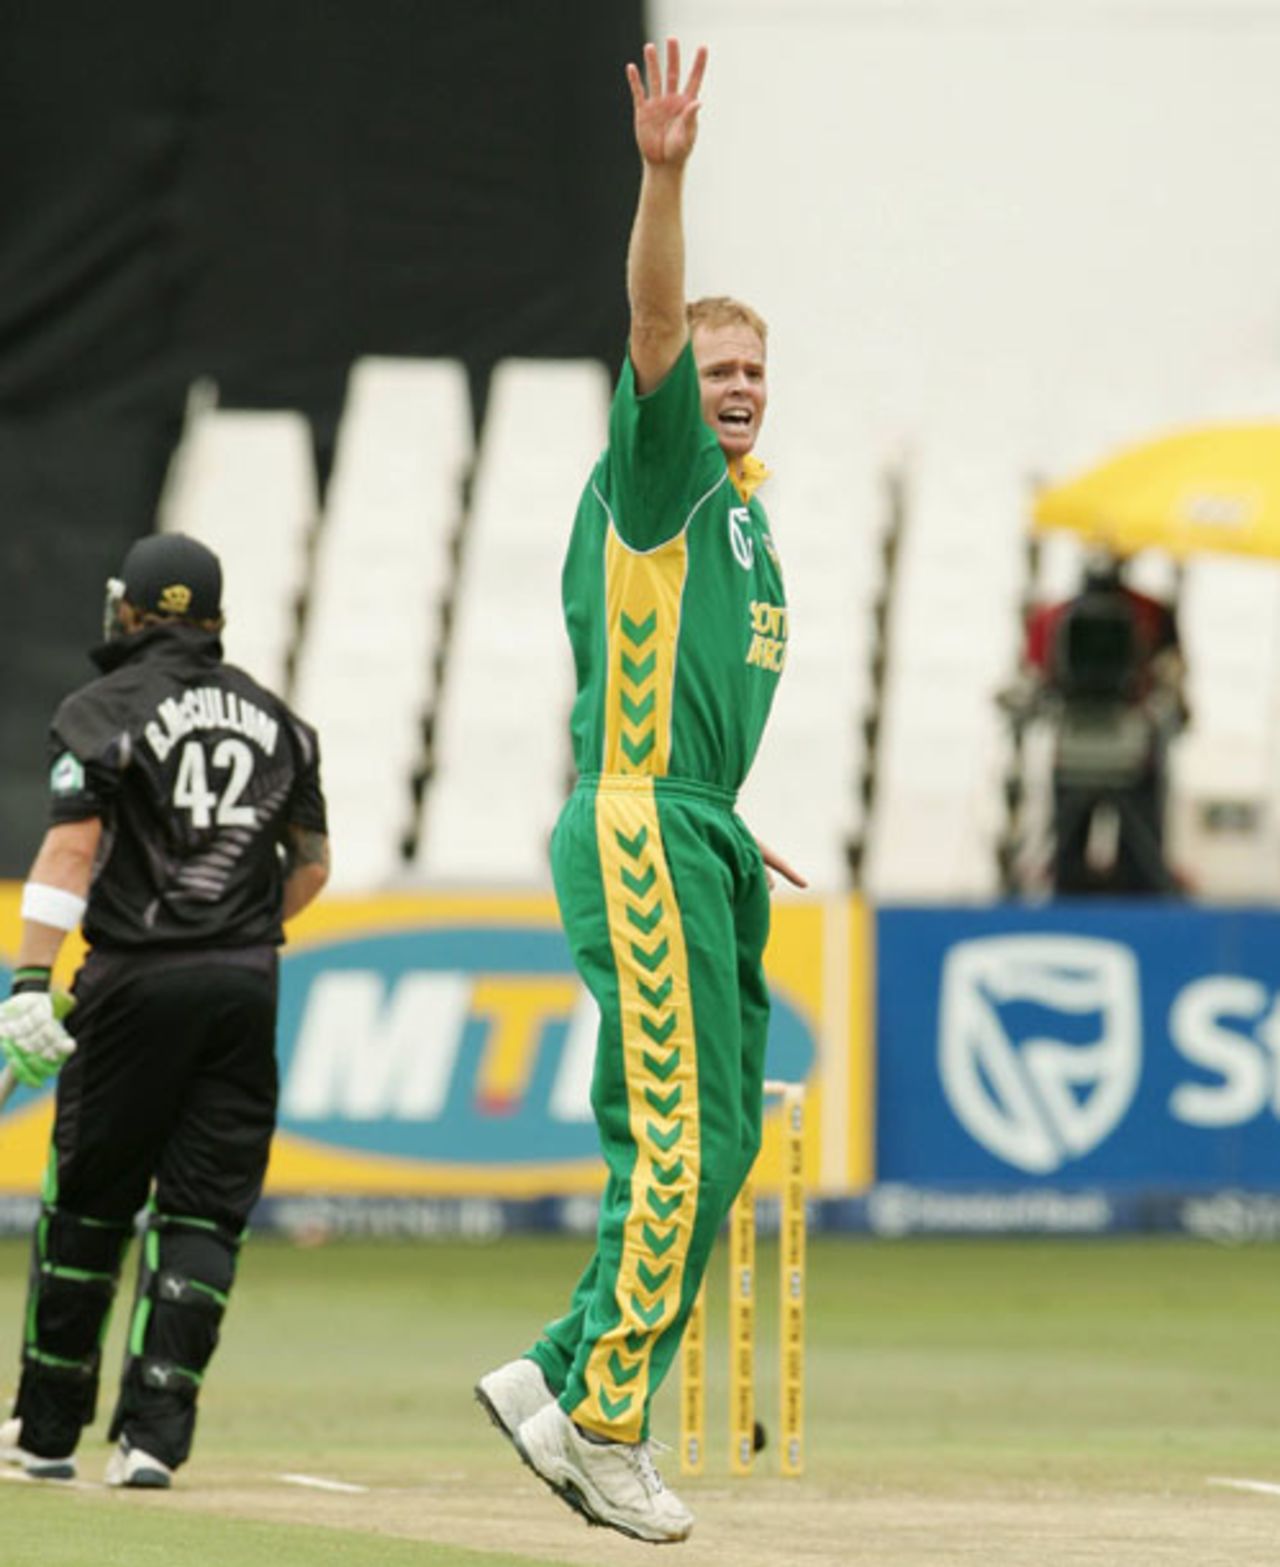 A loud appeal from Shaun Pollock, South Africa v New Zealand, 1st ODI, Durban, November 25, 2007